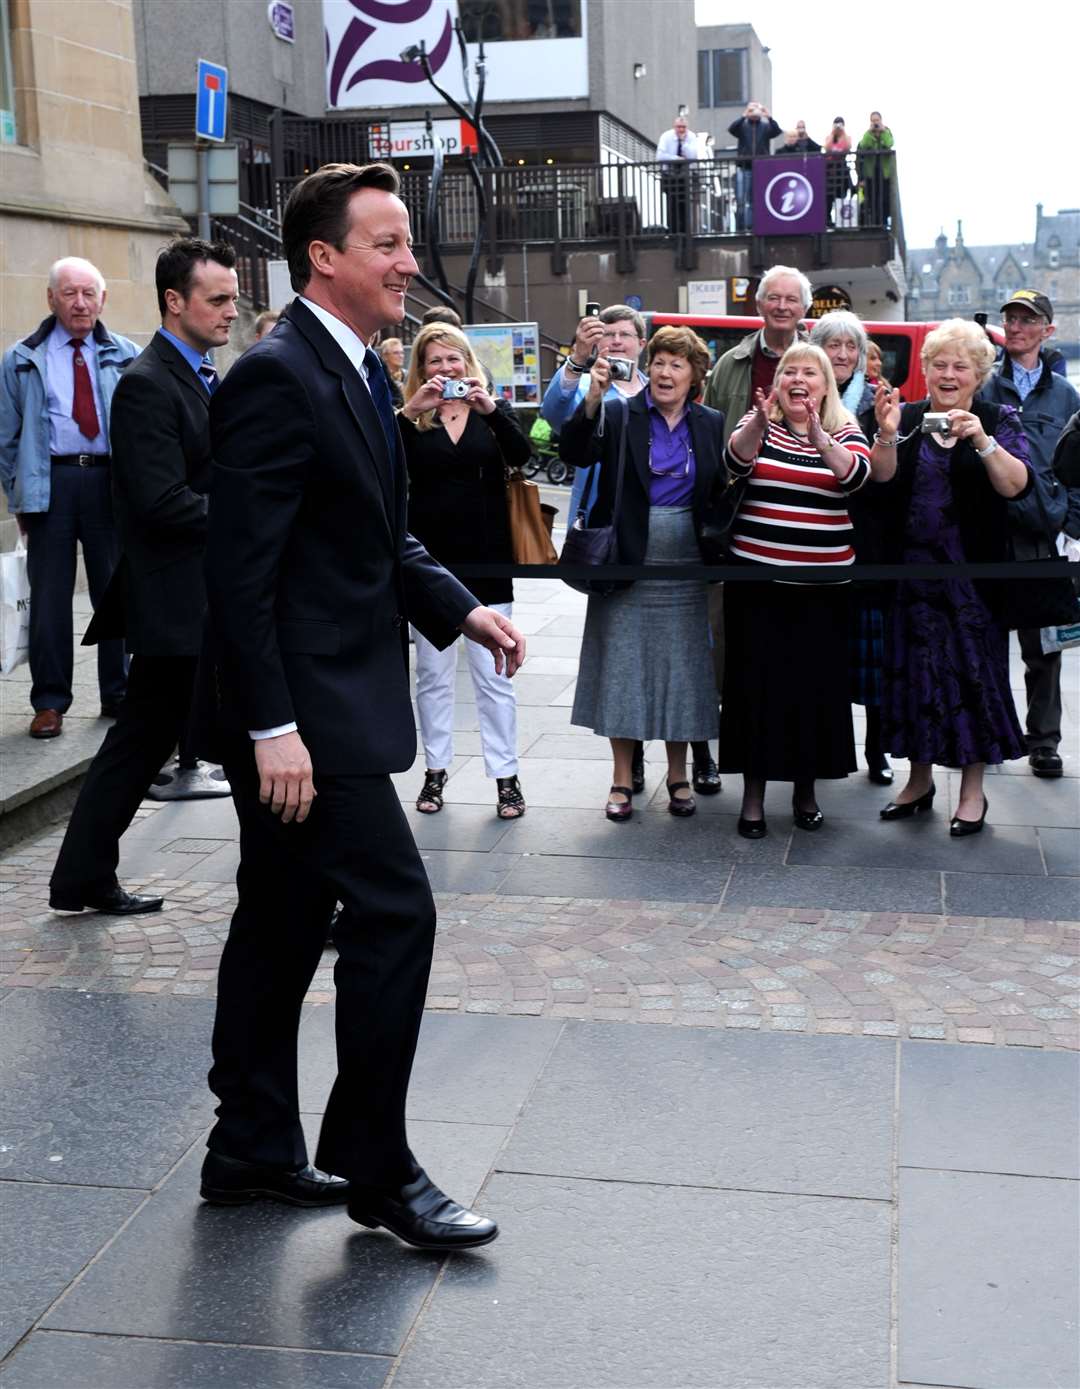 David Cameron during a visit to the Highland capital while he was Prime Minister.